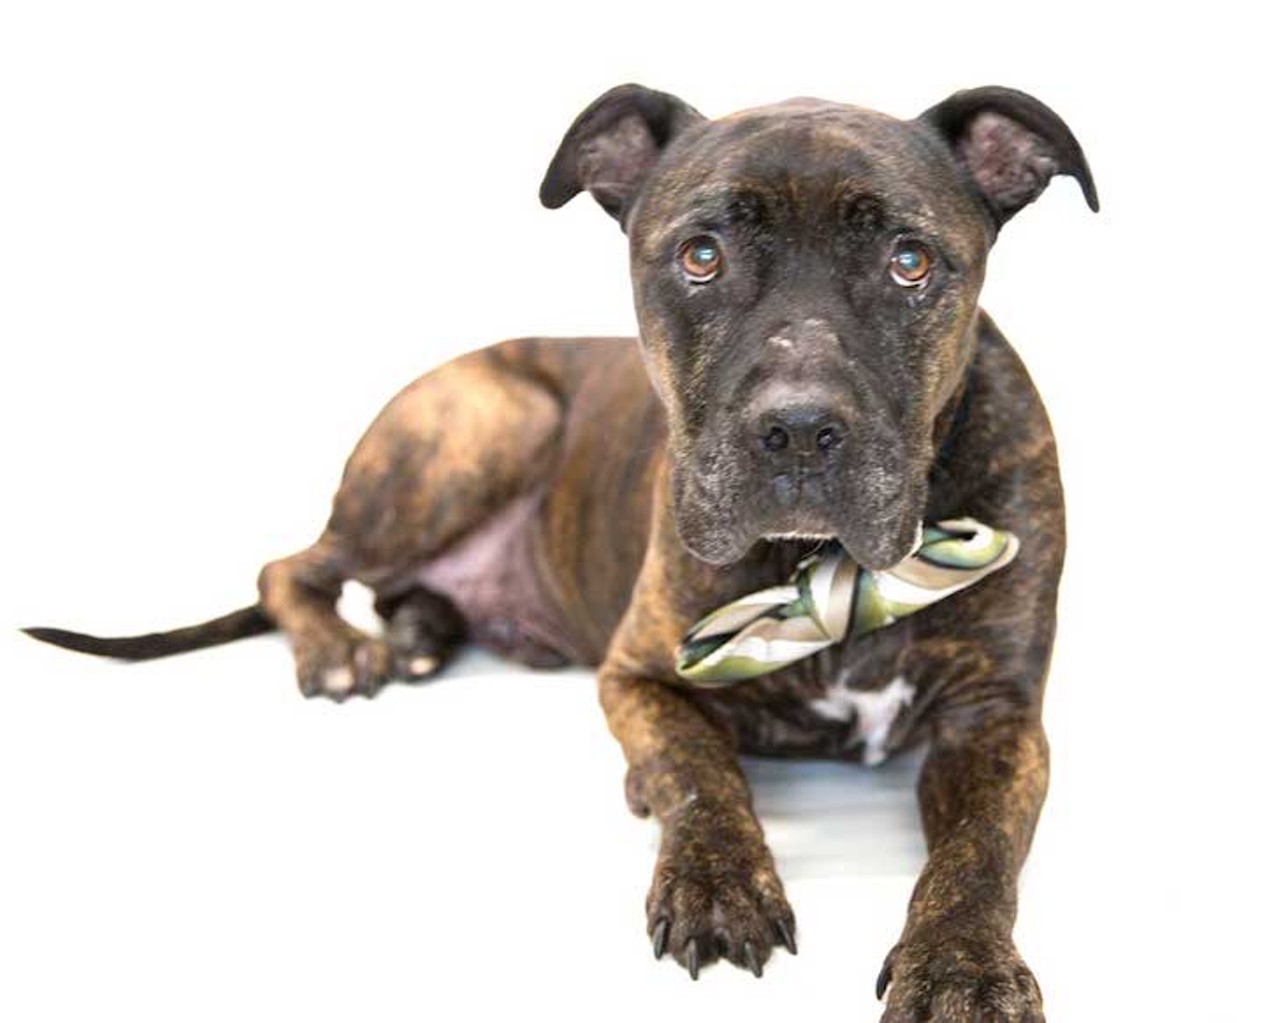 21 adoptable dogs available right now at Orange County Animal Services